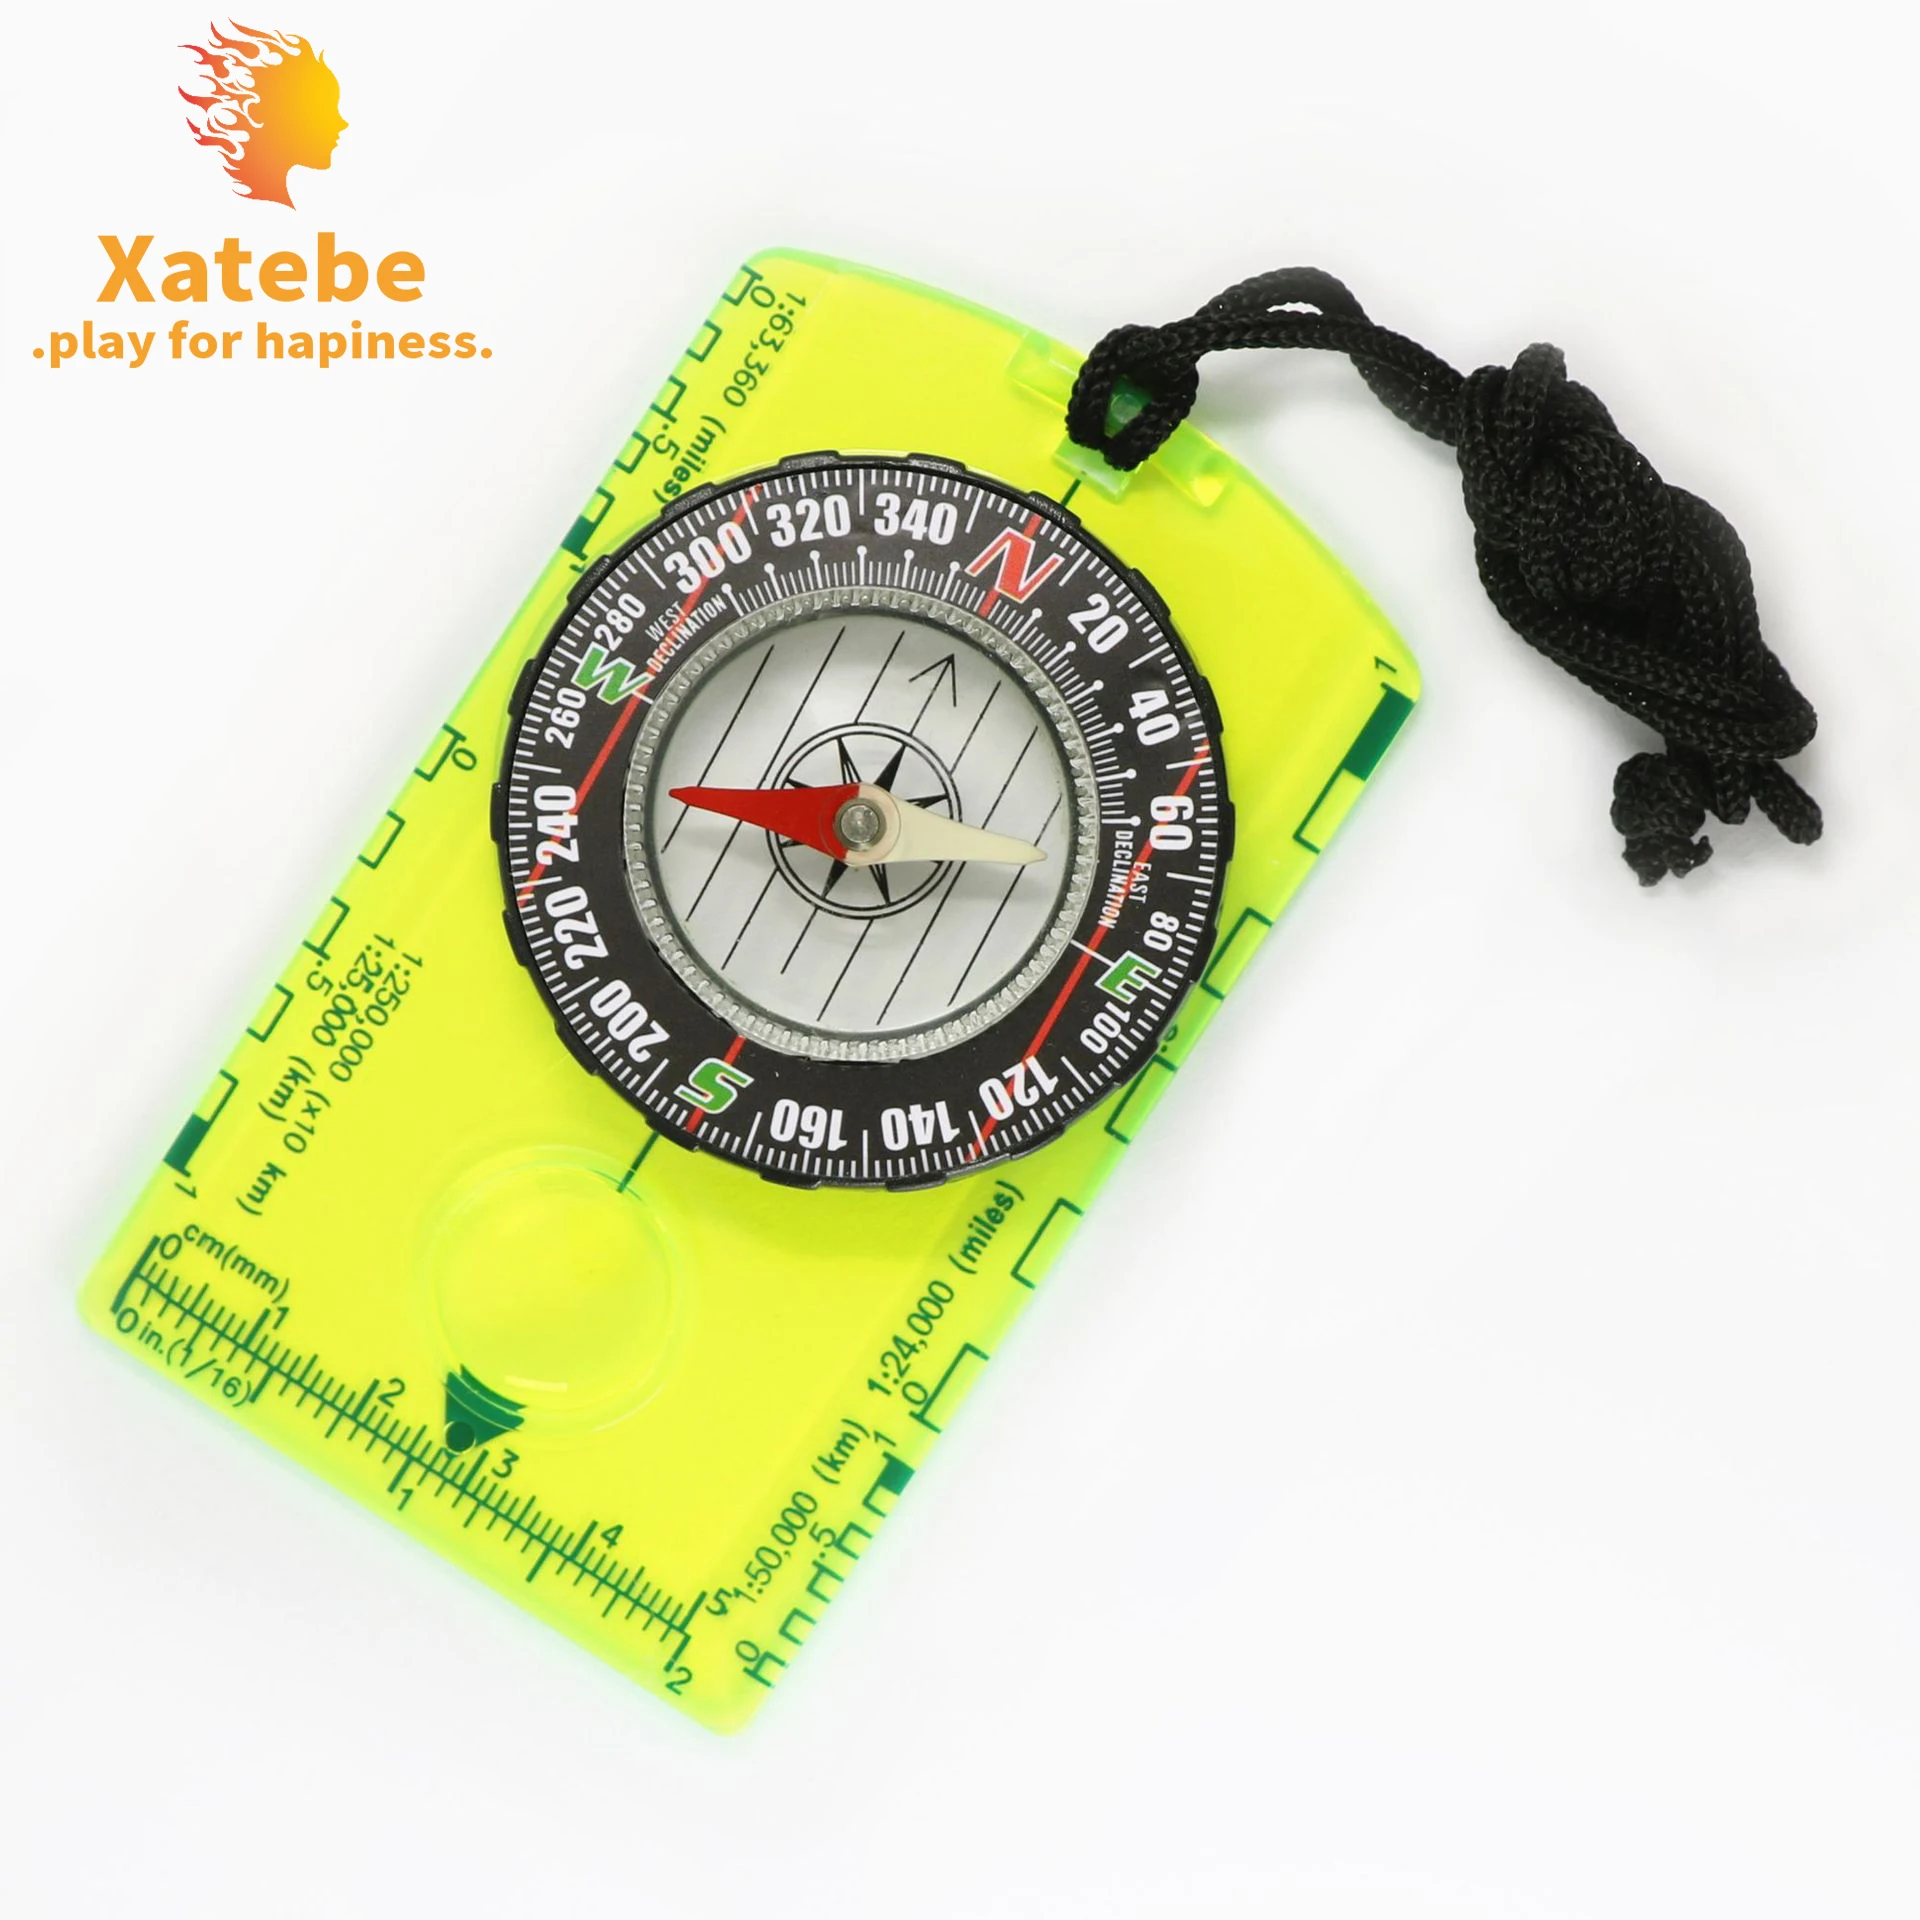 

Outdoor Camping Directional Cross-country Race Hiking Special Compass Baseplate Ruler Map Scale Compass Night Boy gift tool New